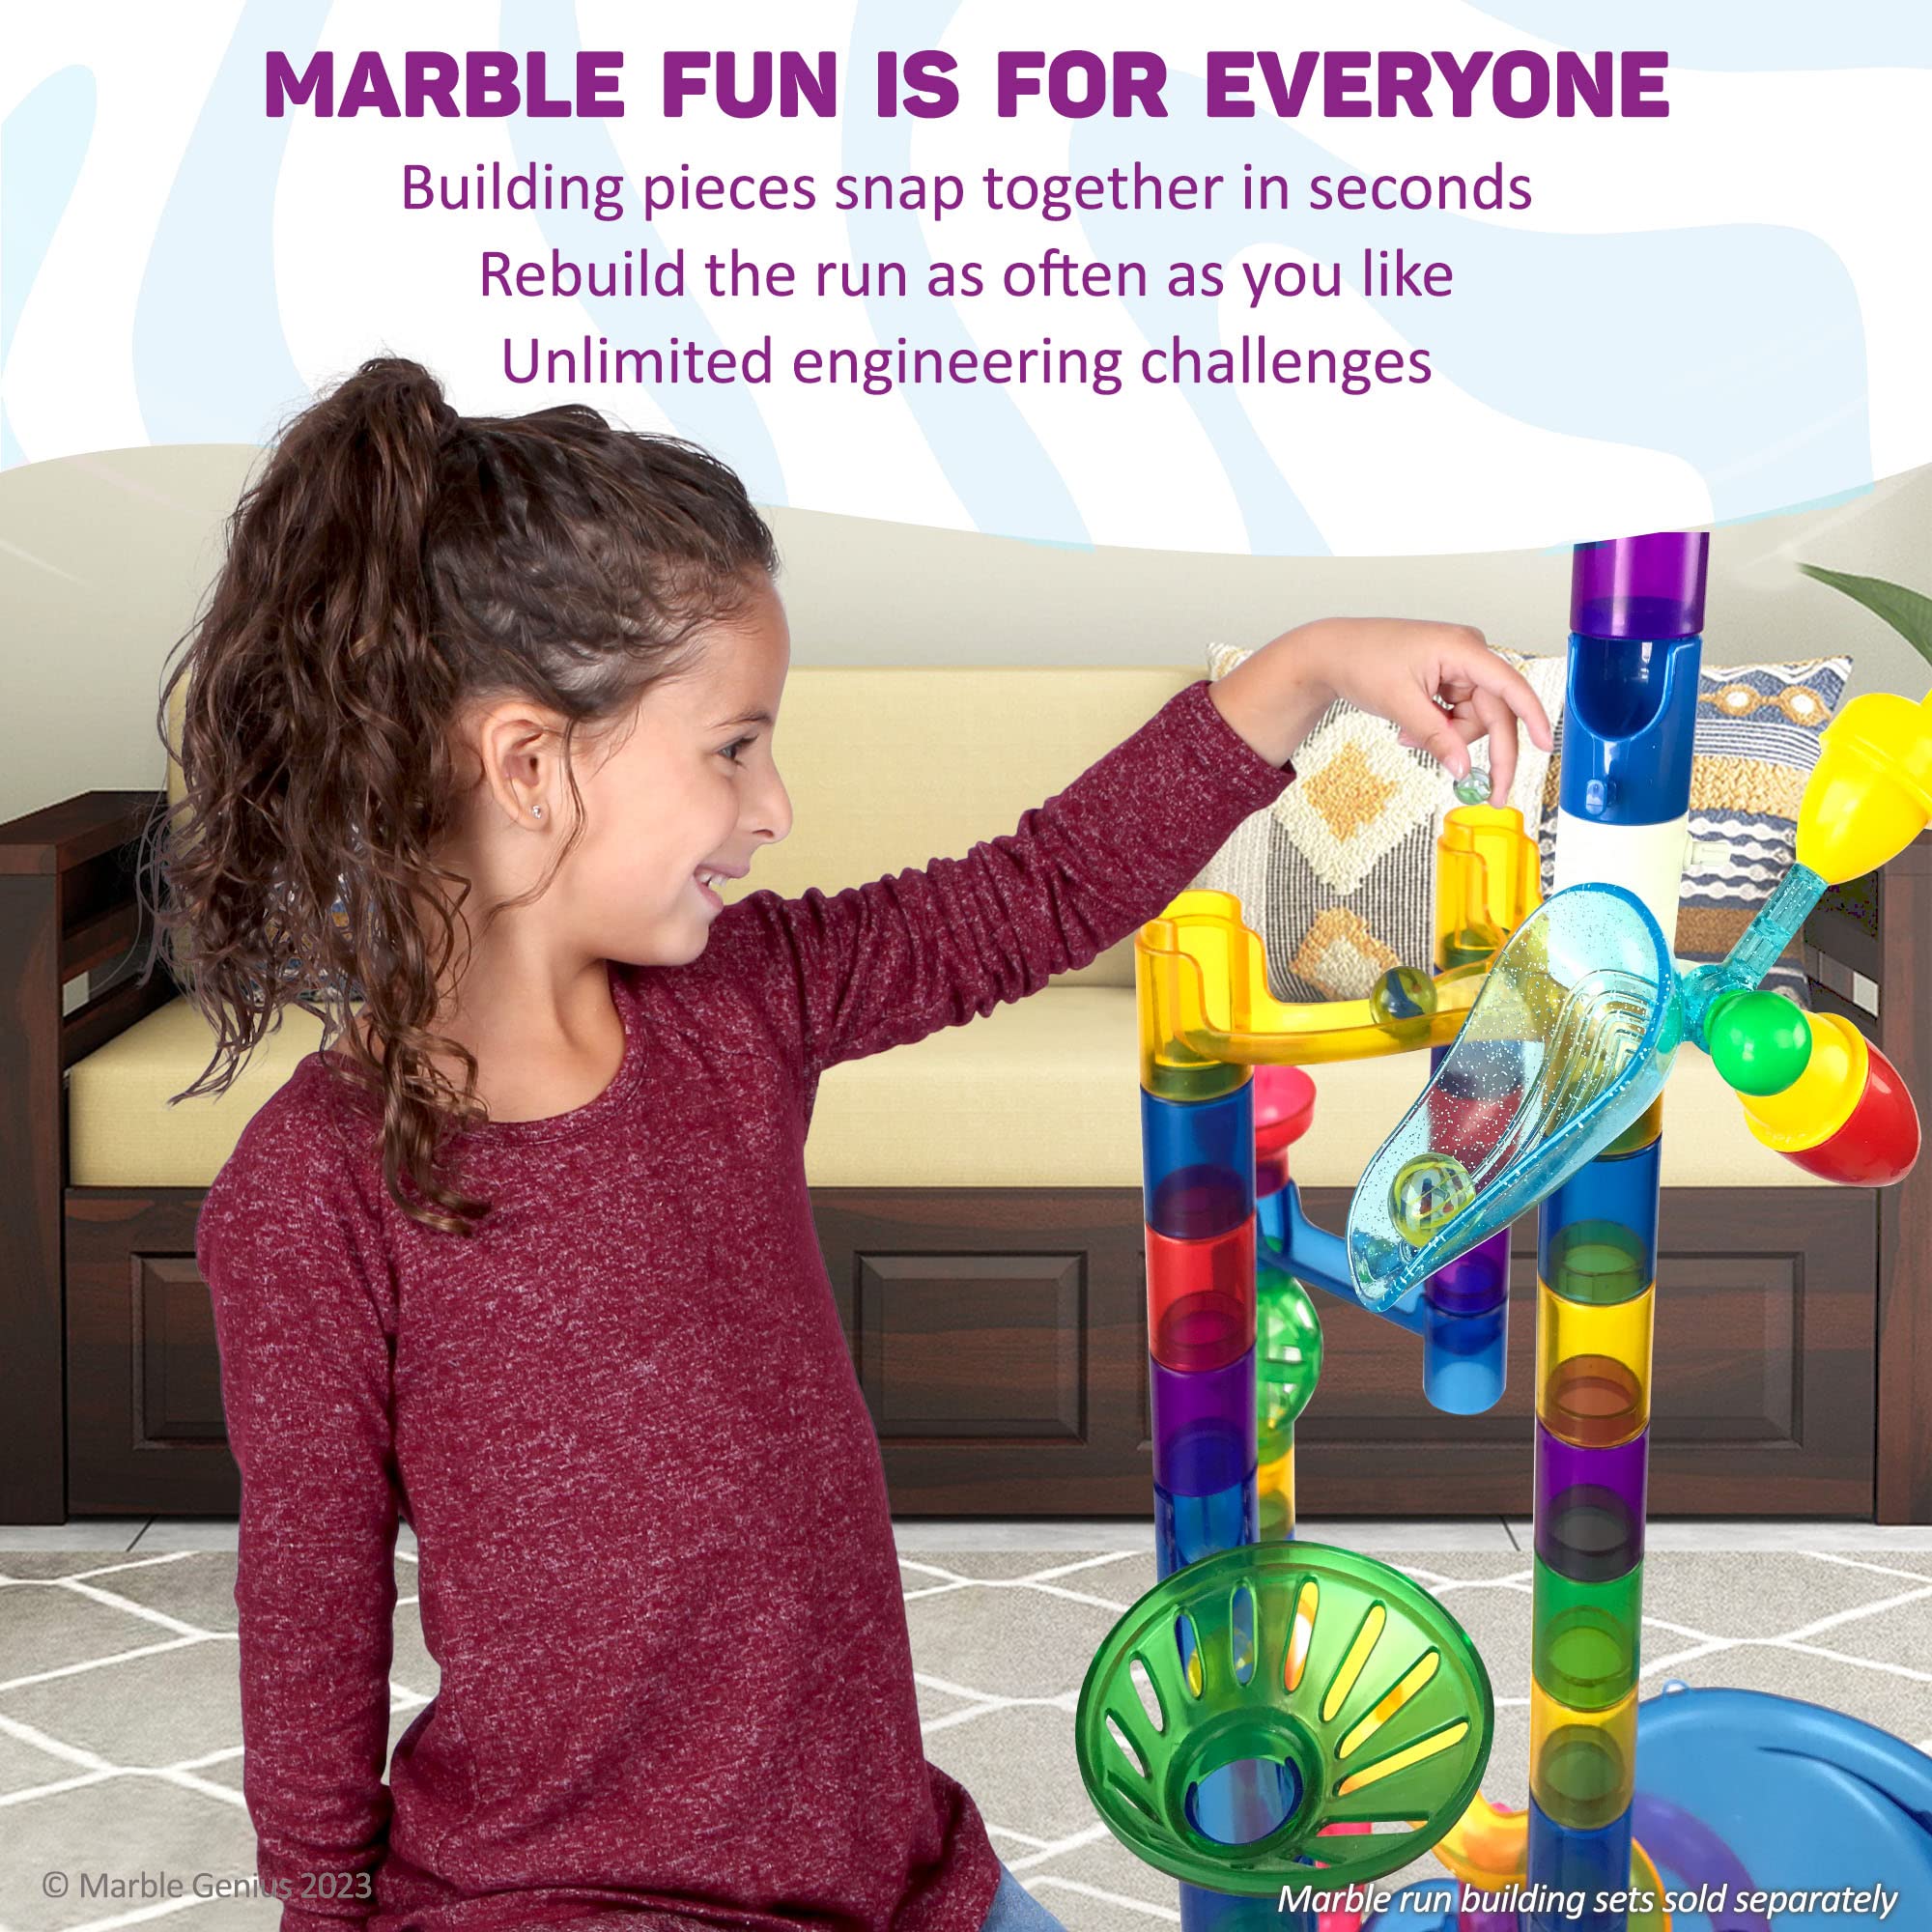 Marble Genius Jumps & Swings 8-pc Accessory Add-On Set: Create Take Your Marble Run to The Next Level, Watch Your Marbles Race Through This Unique & Innovative Add-On, Perfect for Kids & Adults Alike